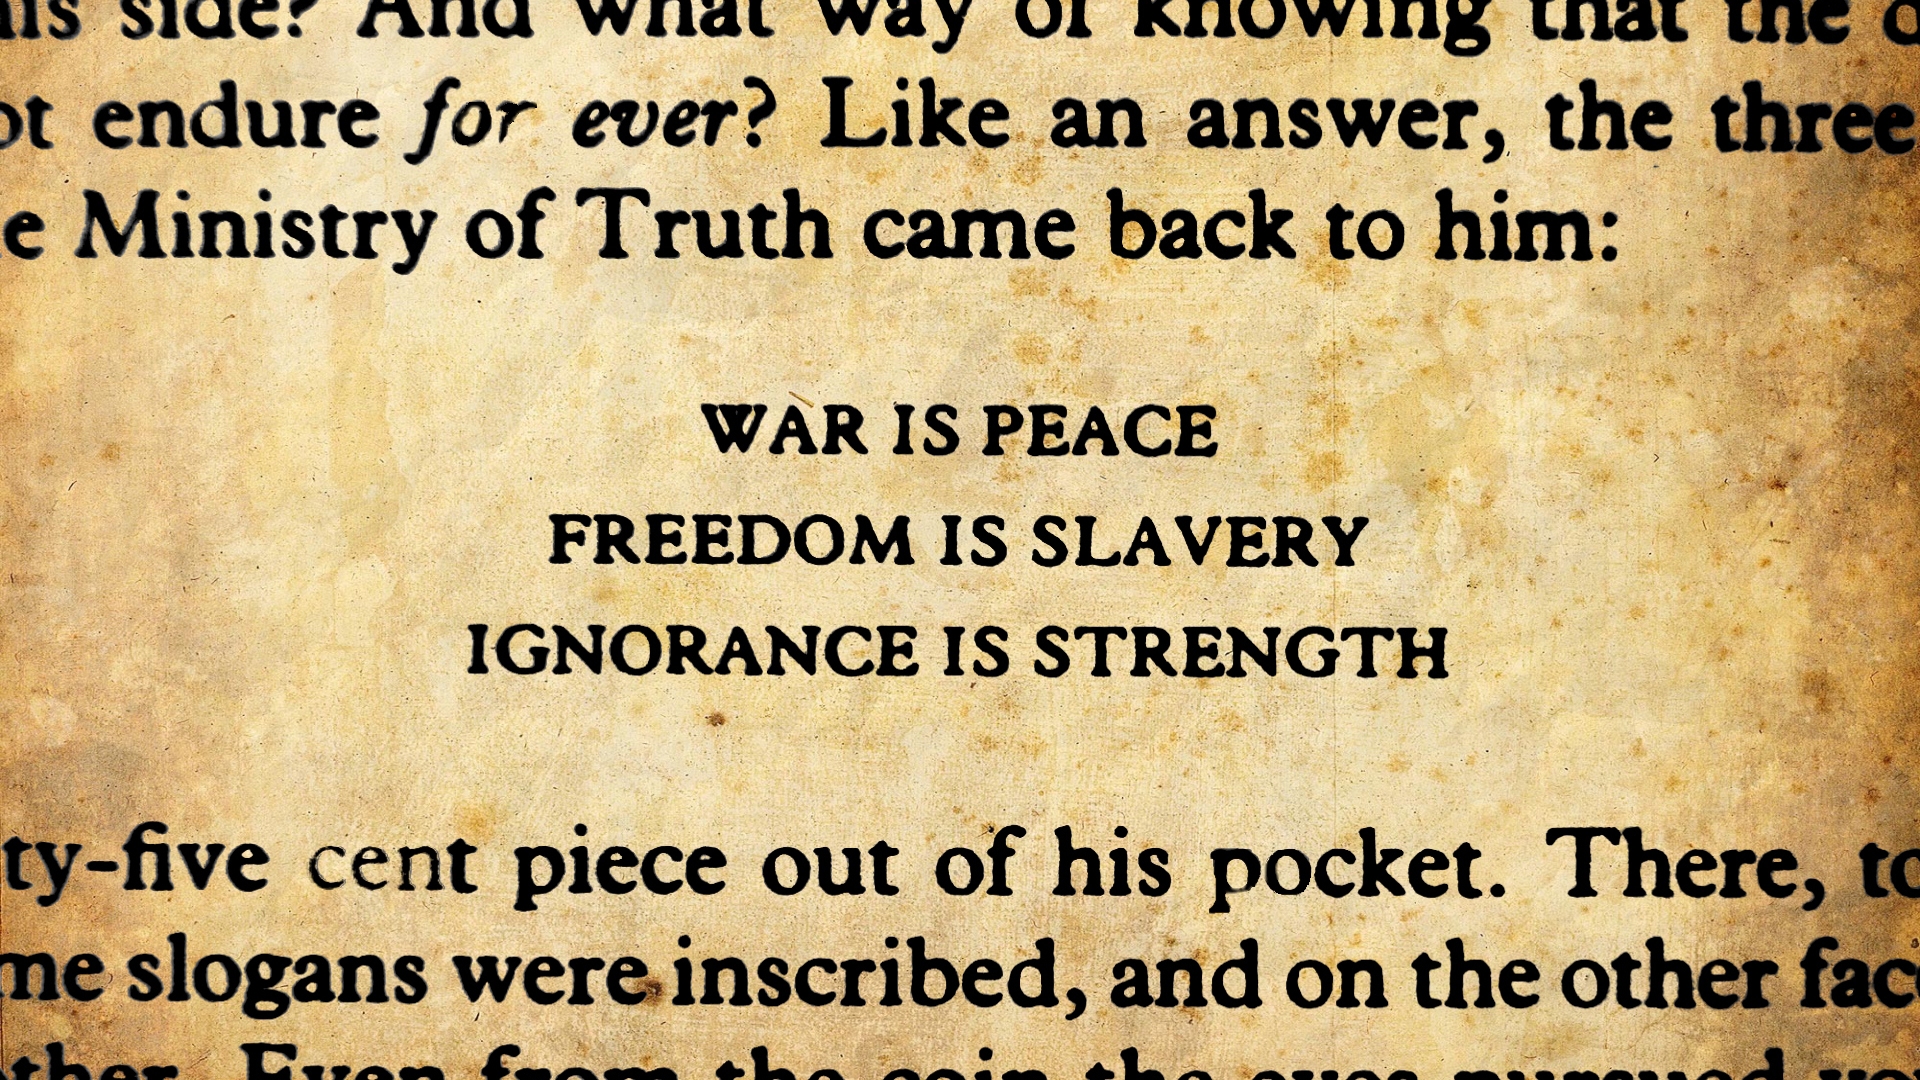 1984, George Orwell, Books, Quote Wallpaper